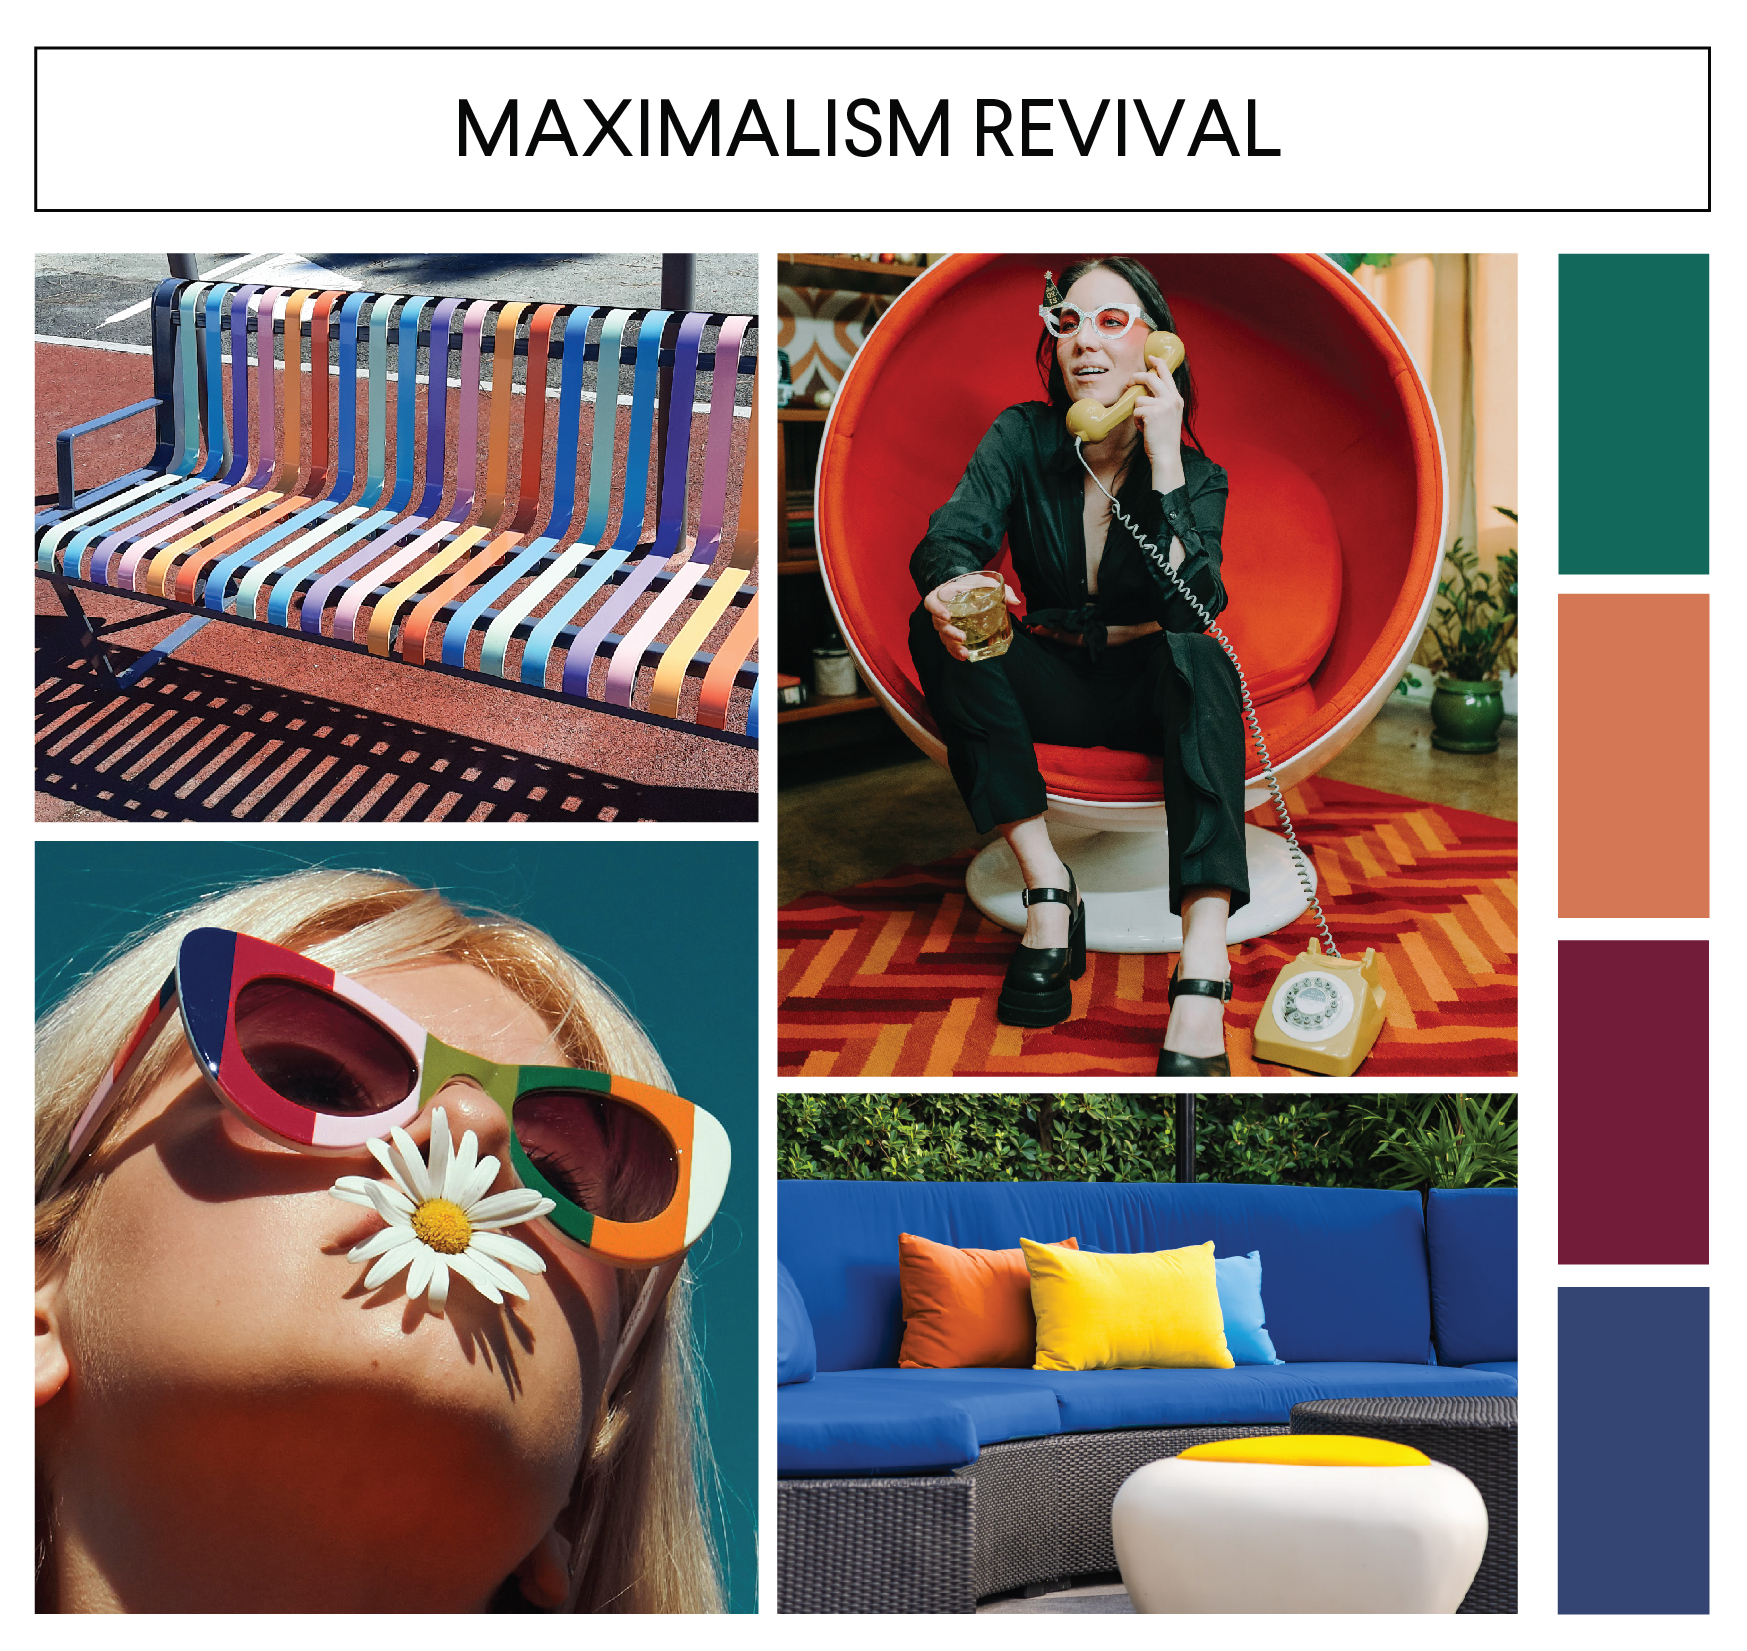 Image of maximalism revival page